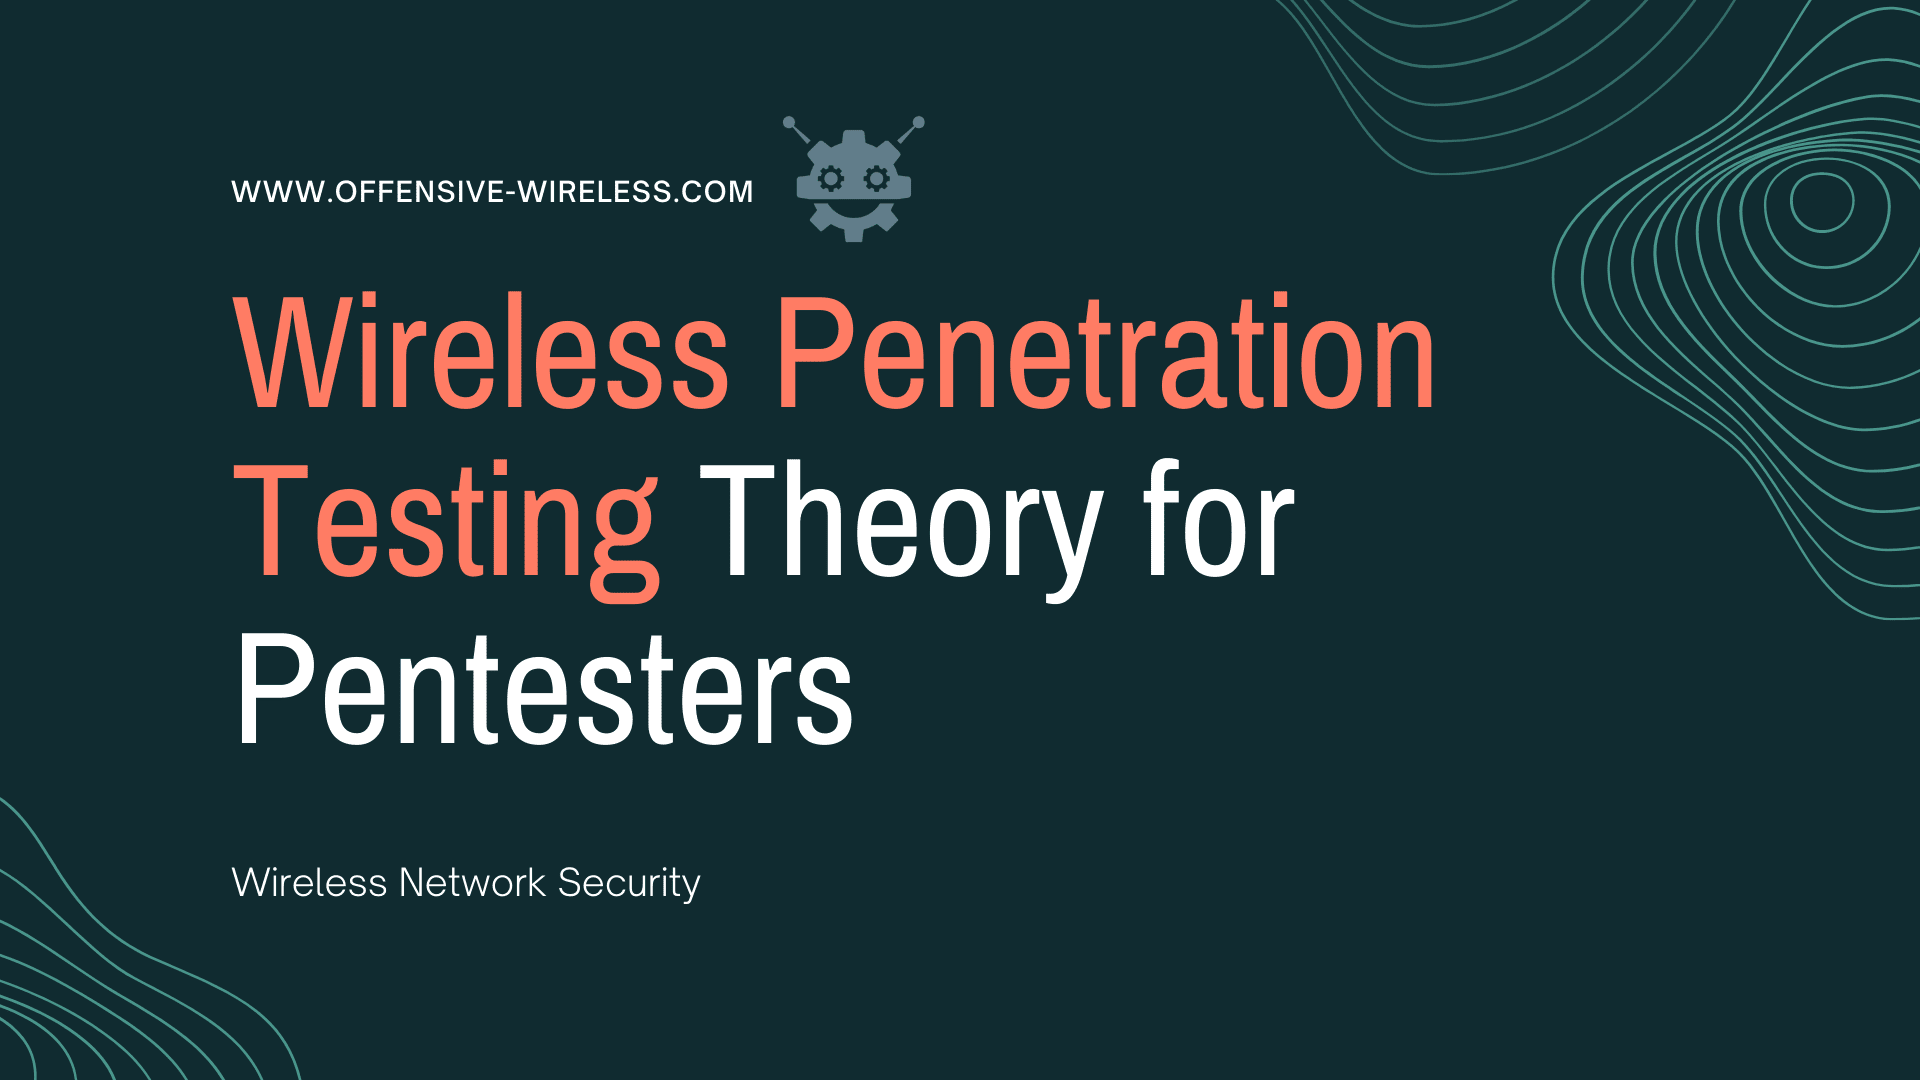 Wireless Penetration Testing: Theory for Pentesters